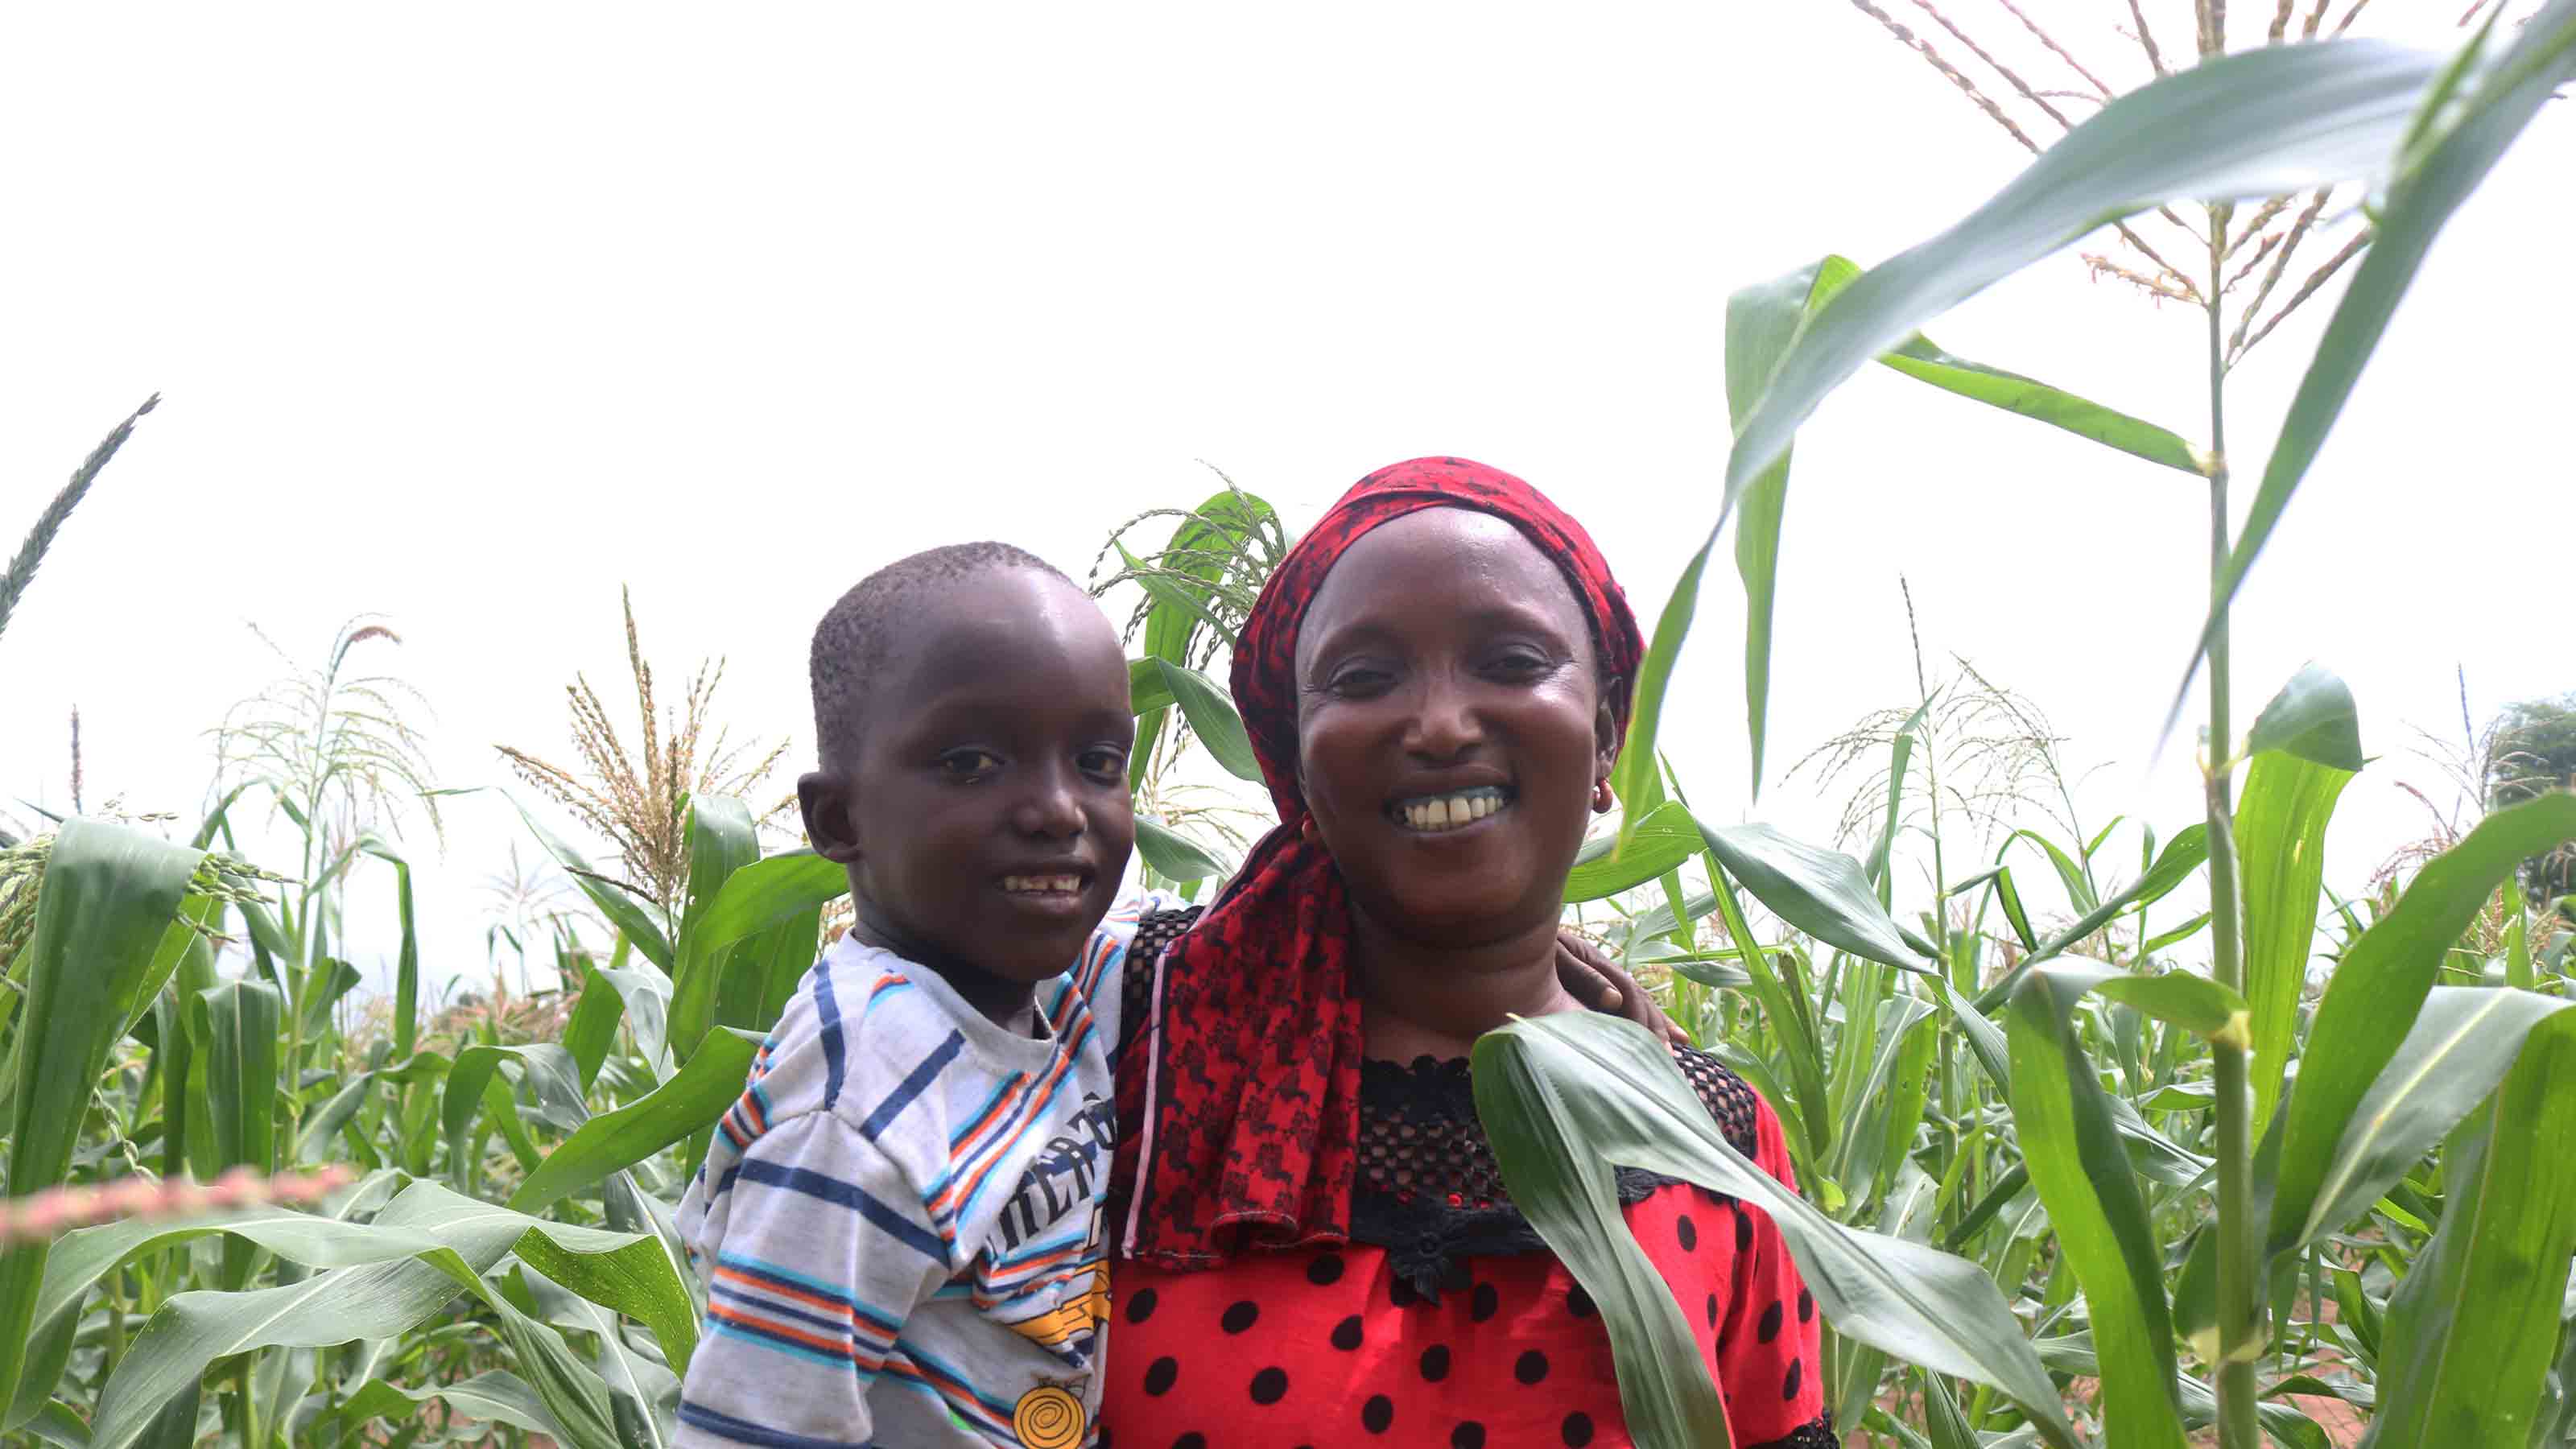 Mother and child smiling at the field